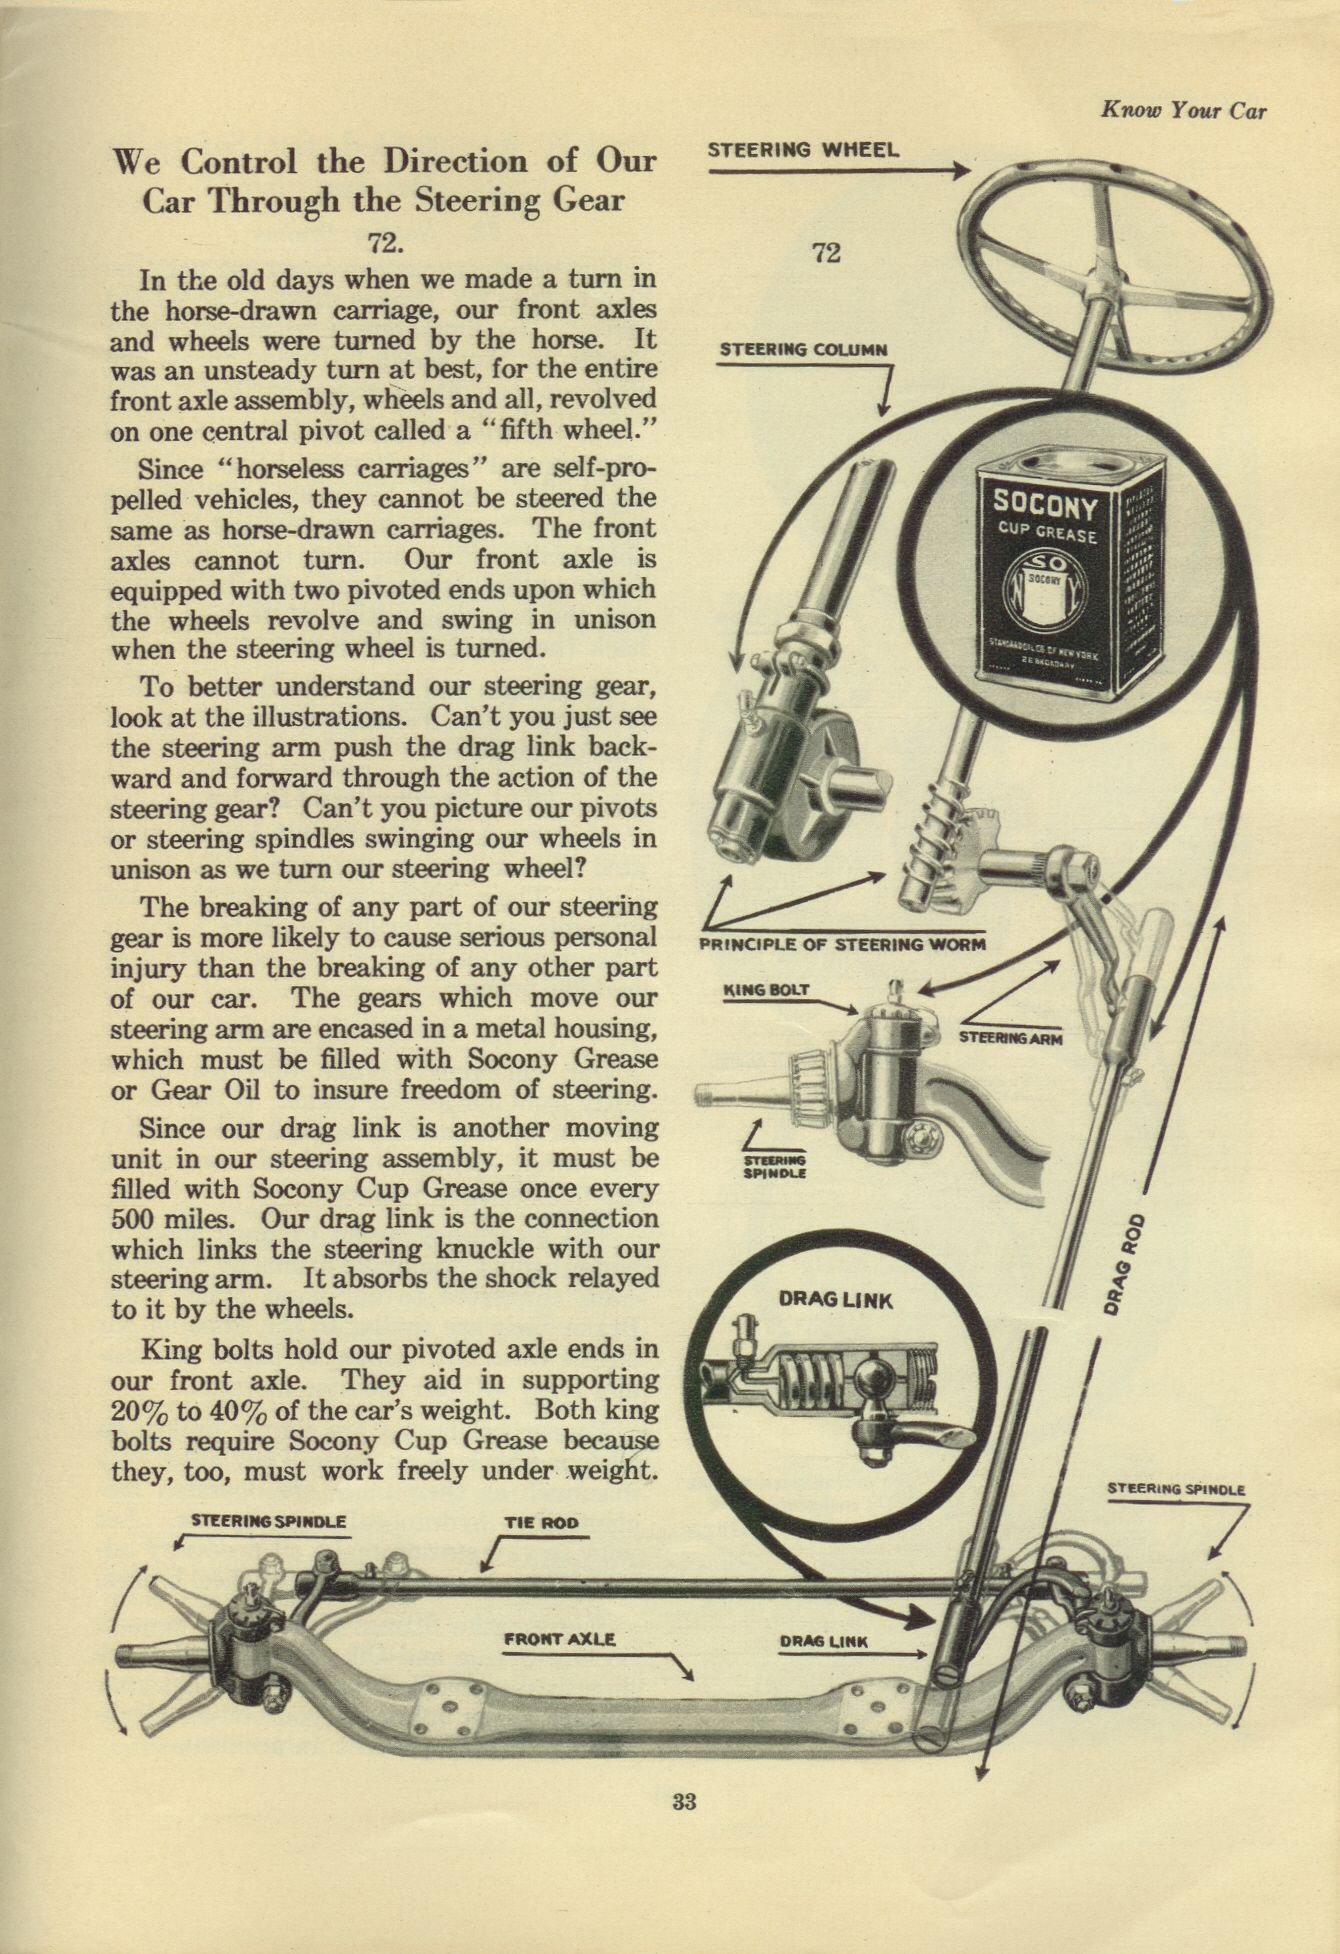 1928 Know Your Car-33